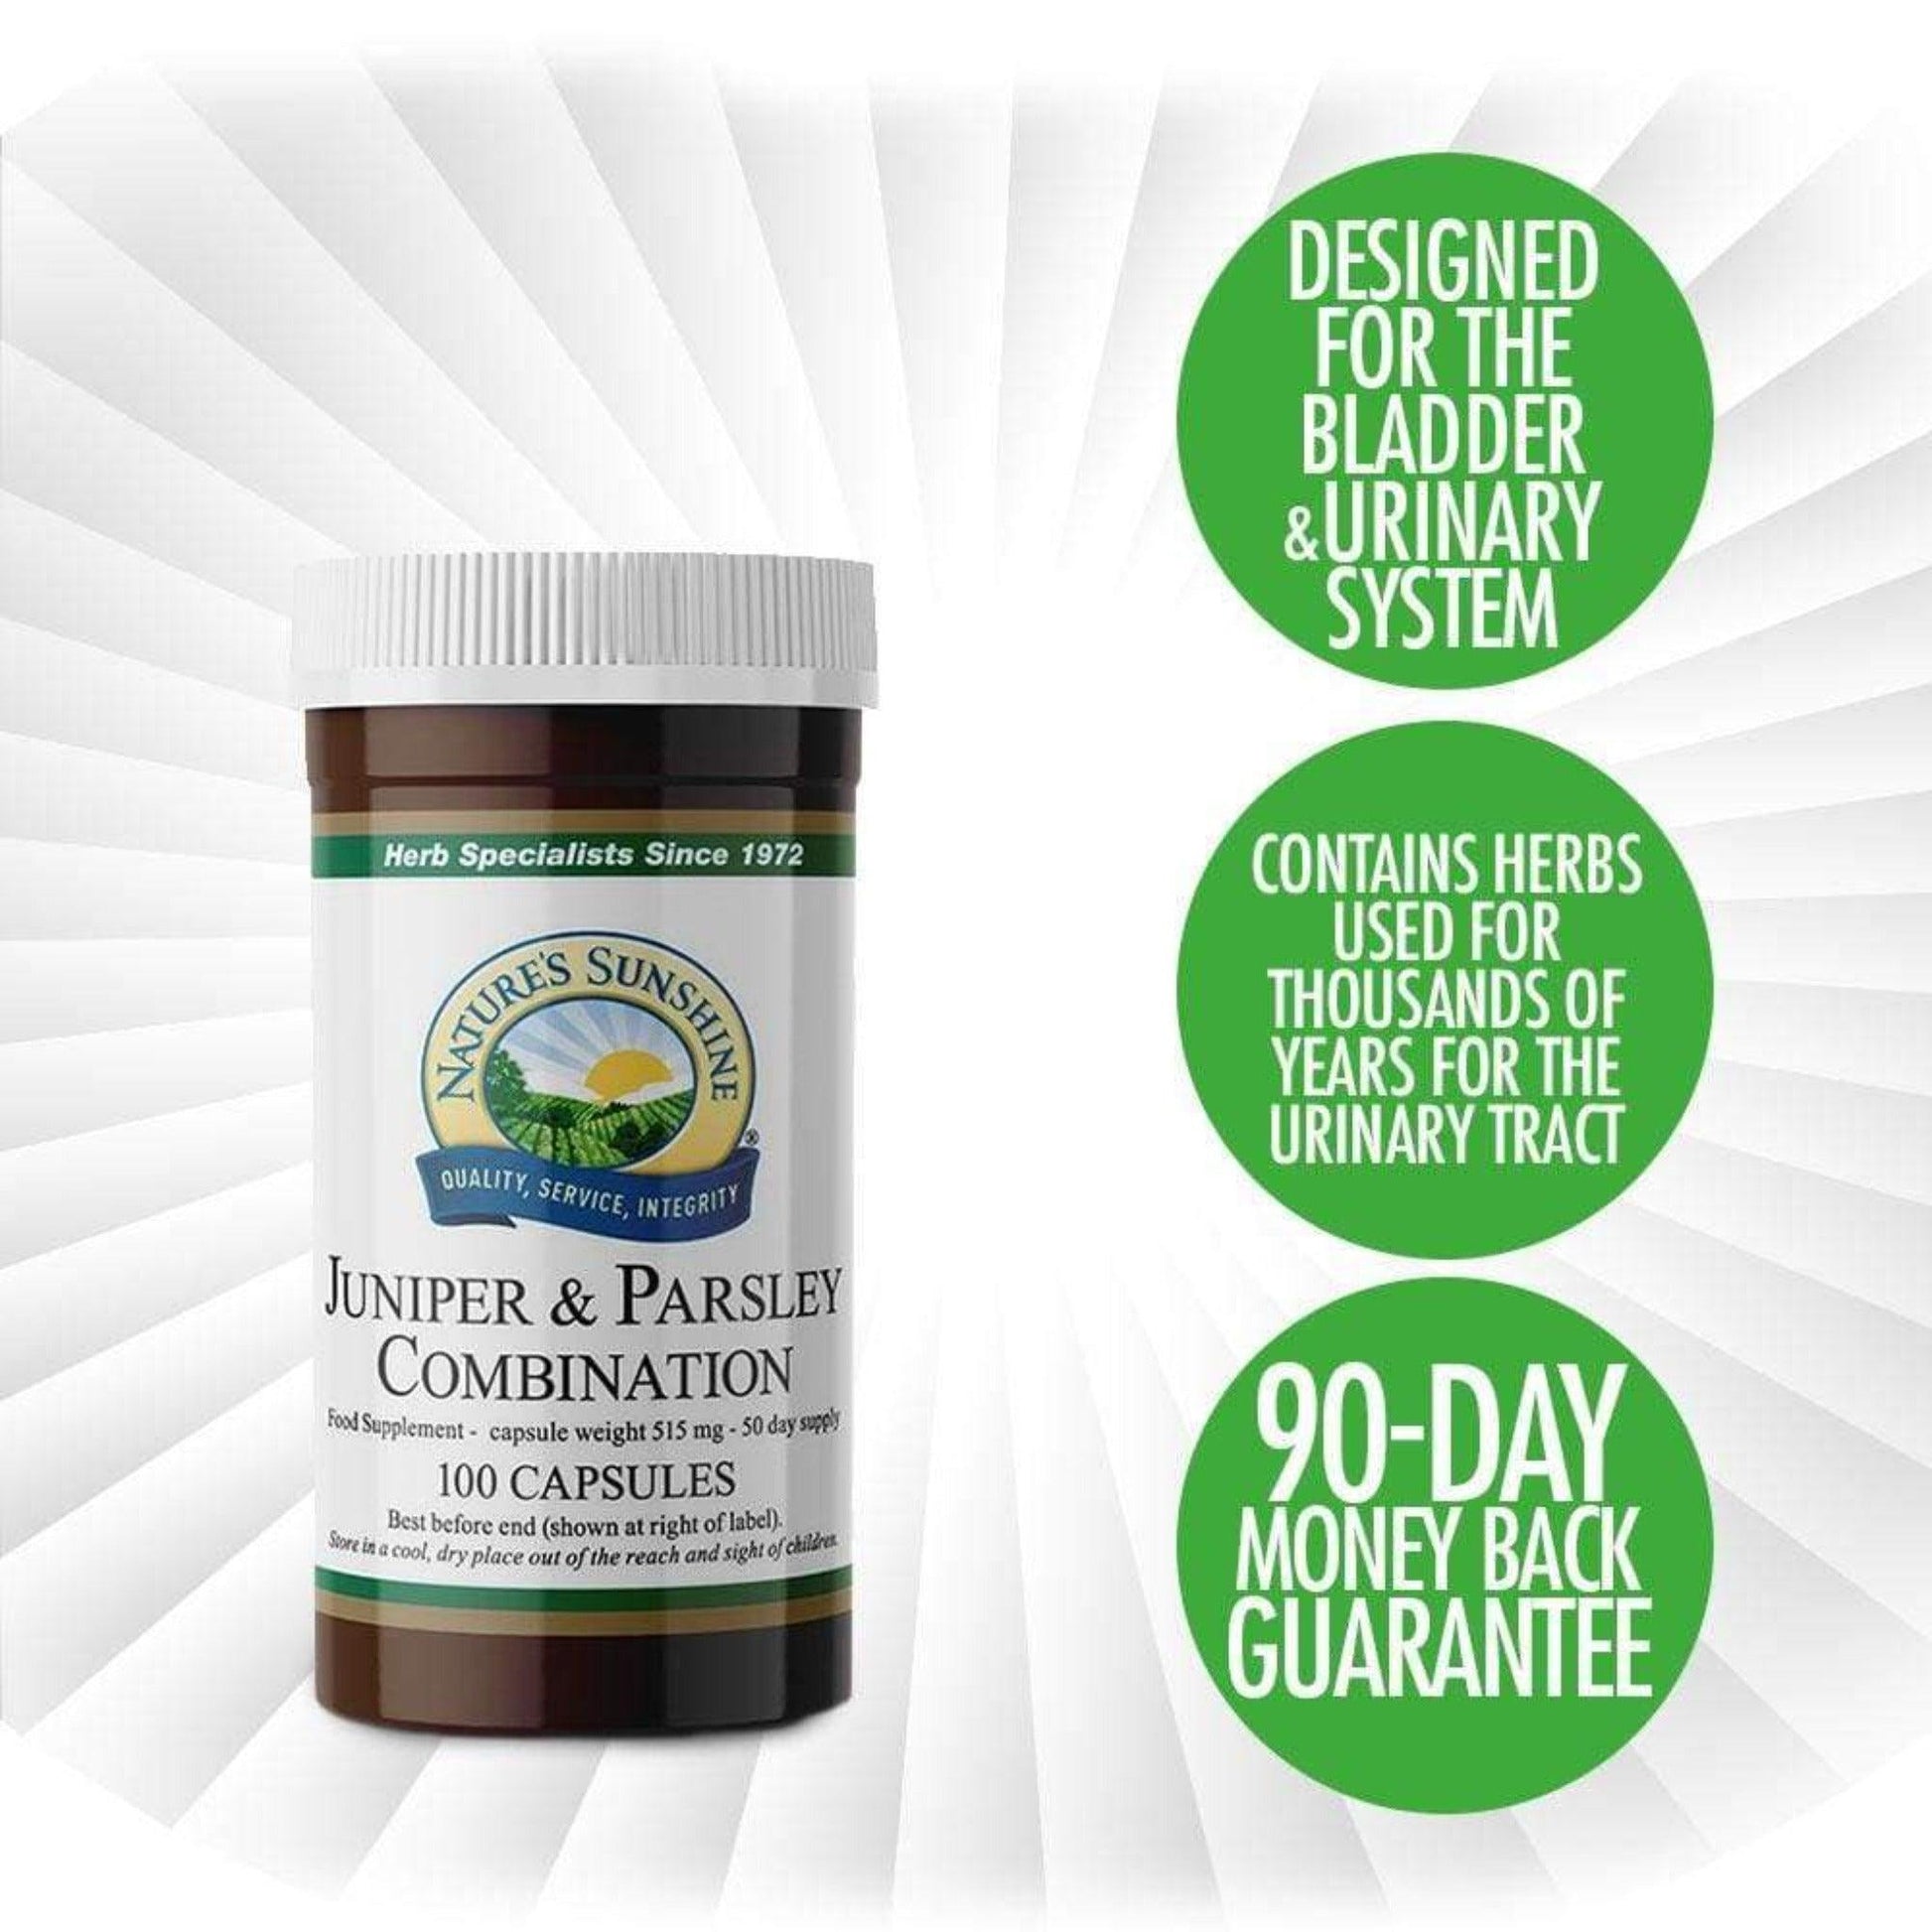 Nature’s Sunshine Juniper and Parsley Combination has been designed to support the bladder and urinary systems